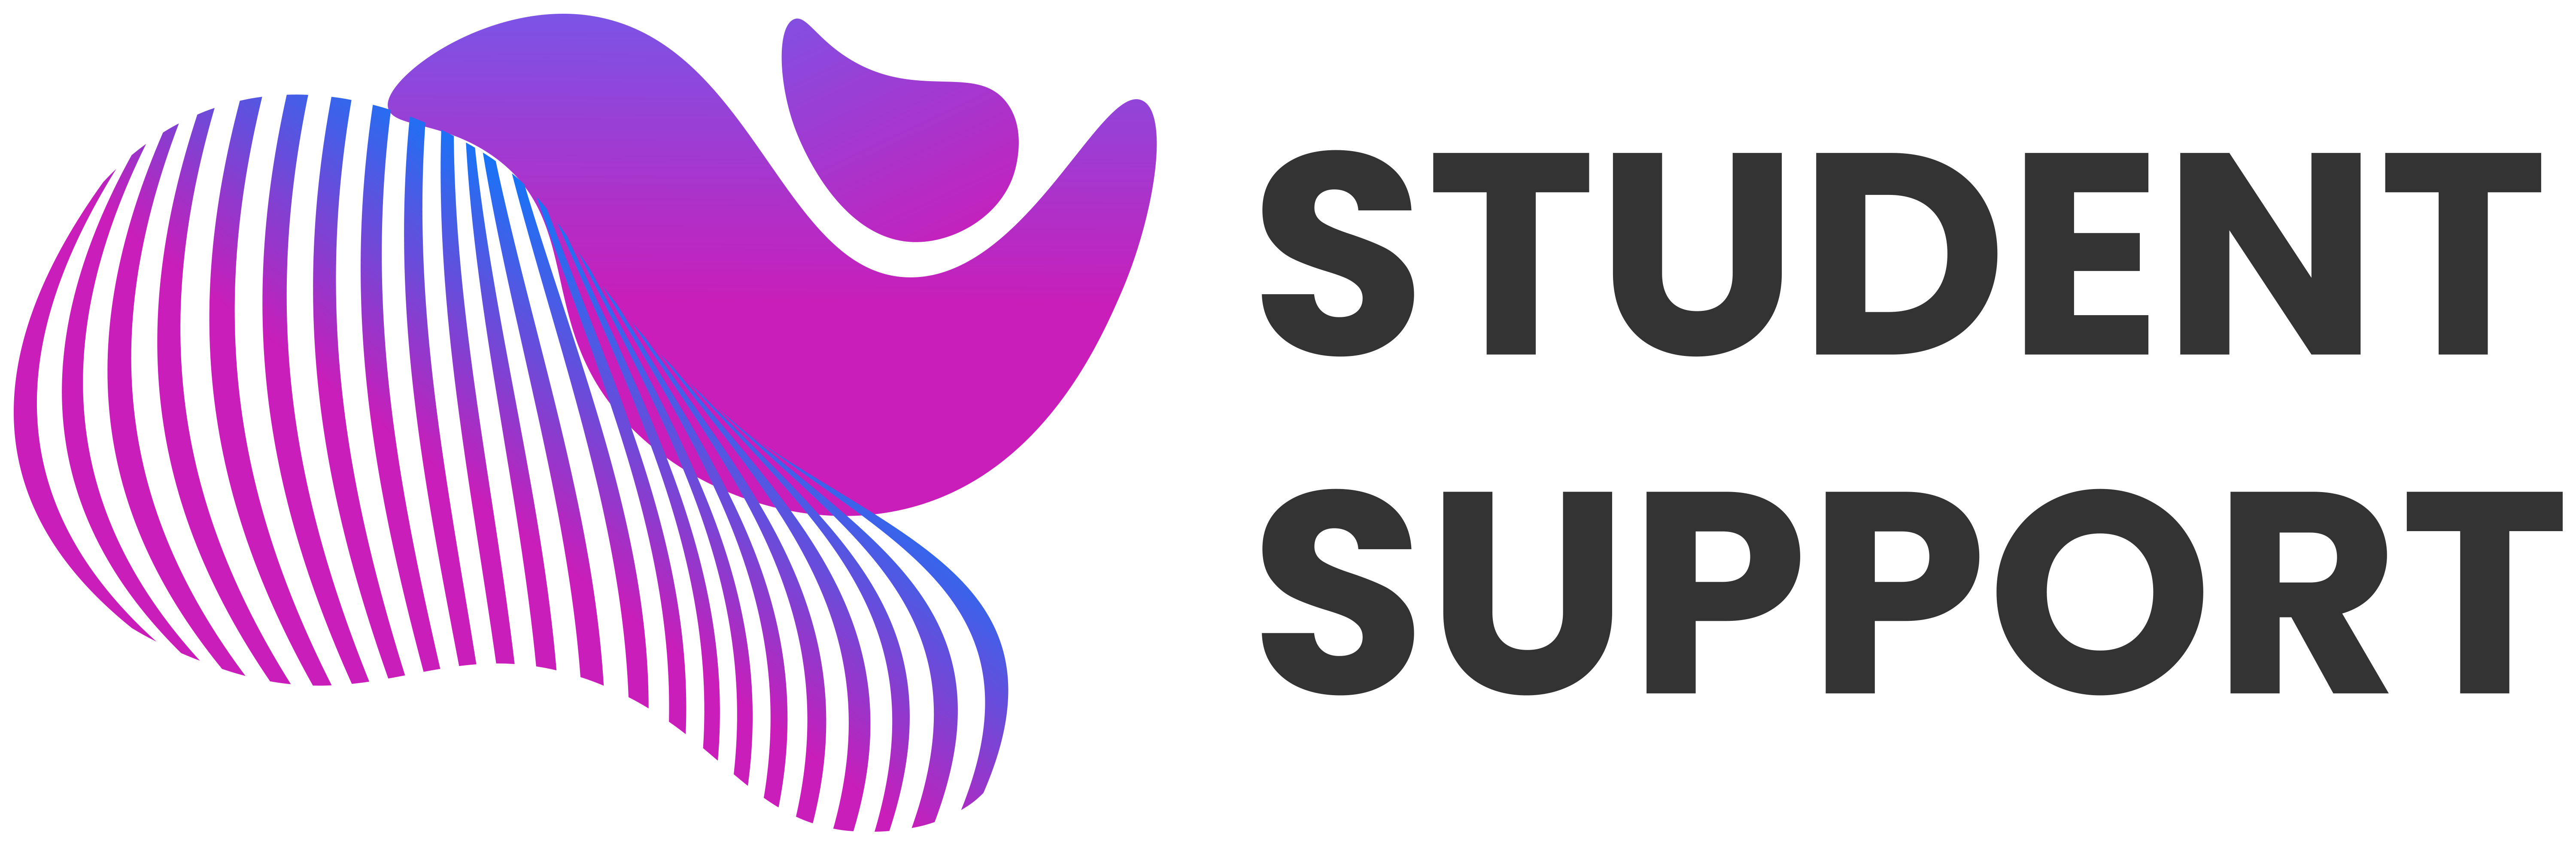 Student Support Logo